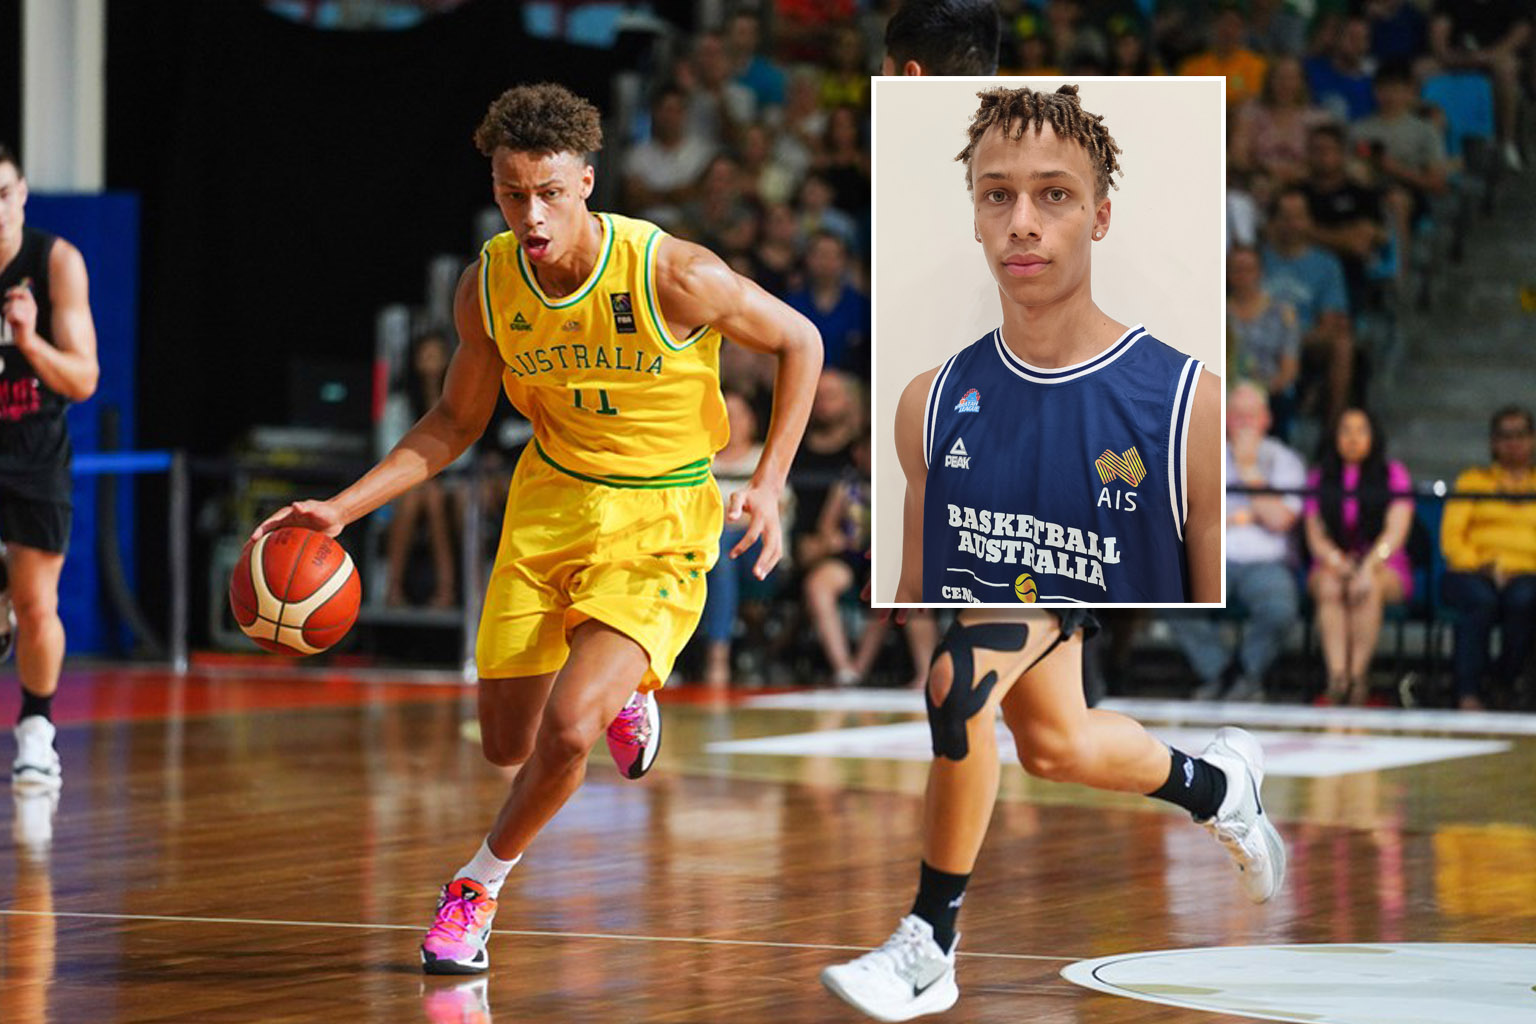 Dyson Daniels playing basketball for Australia, inset of Dyson wearing Basketball Australia Centre of Excellence jersey.